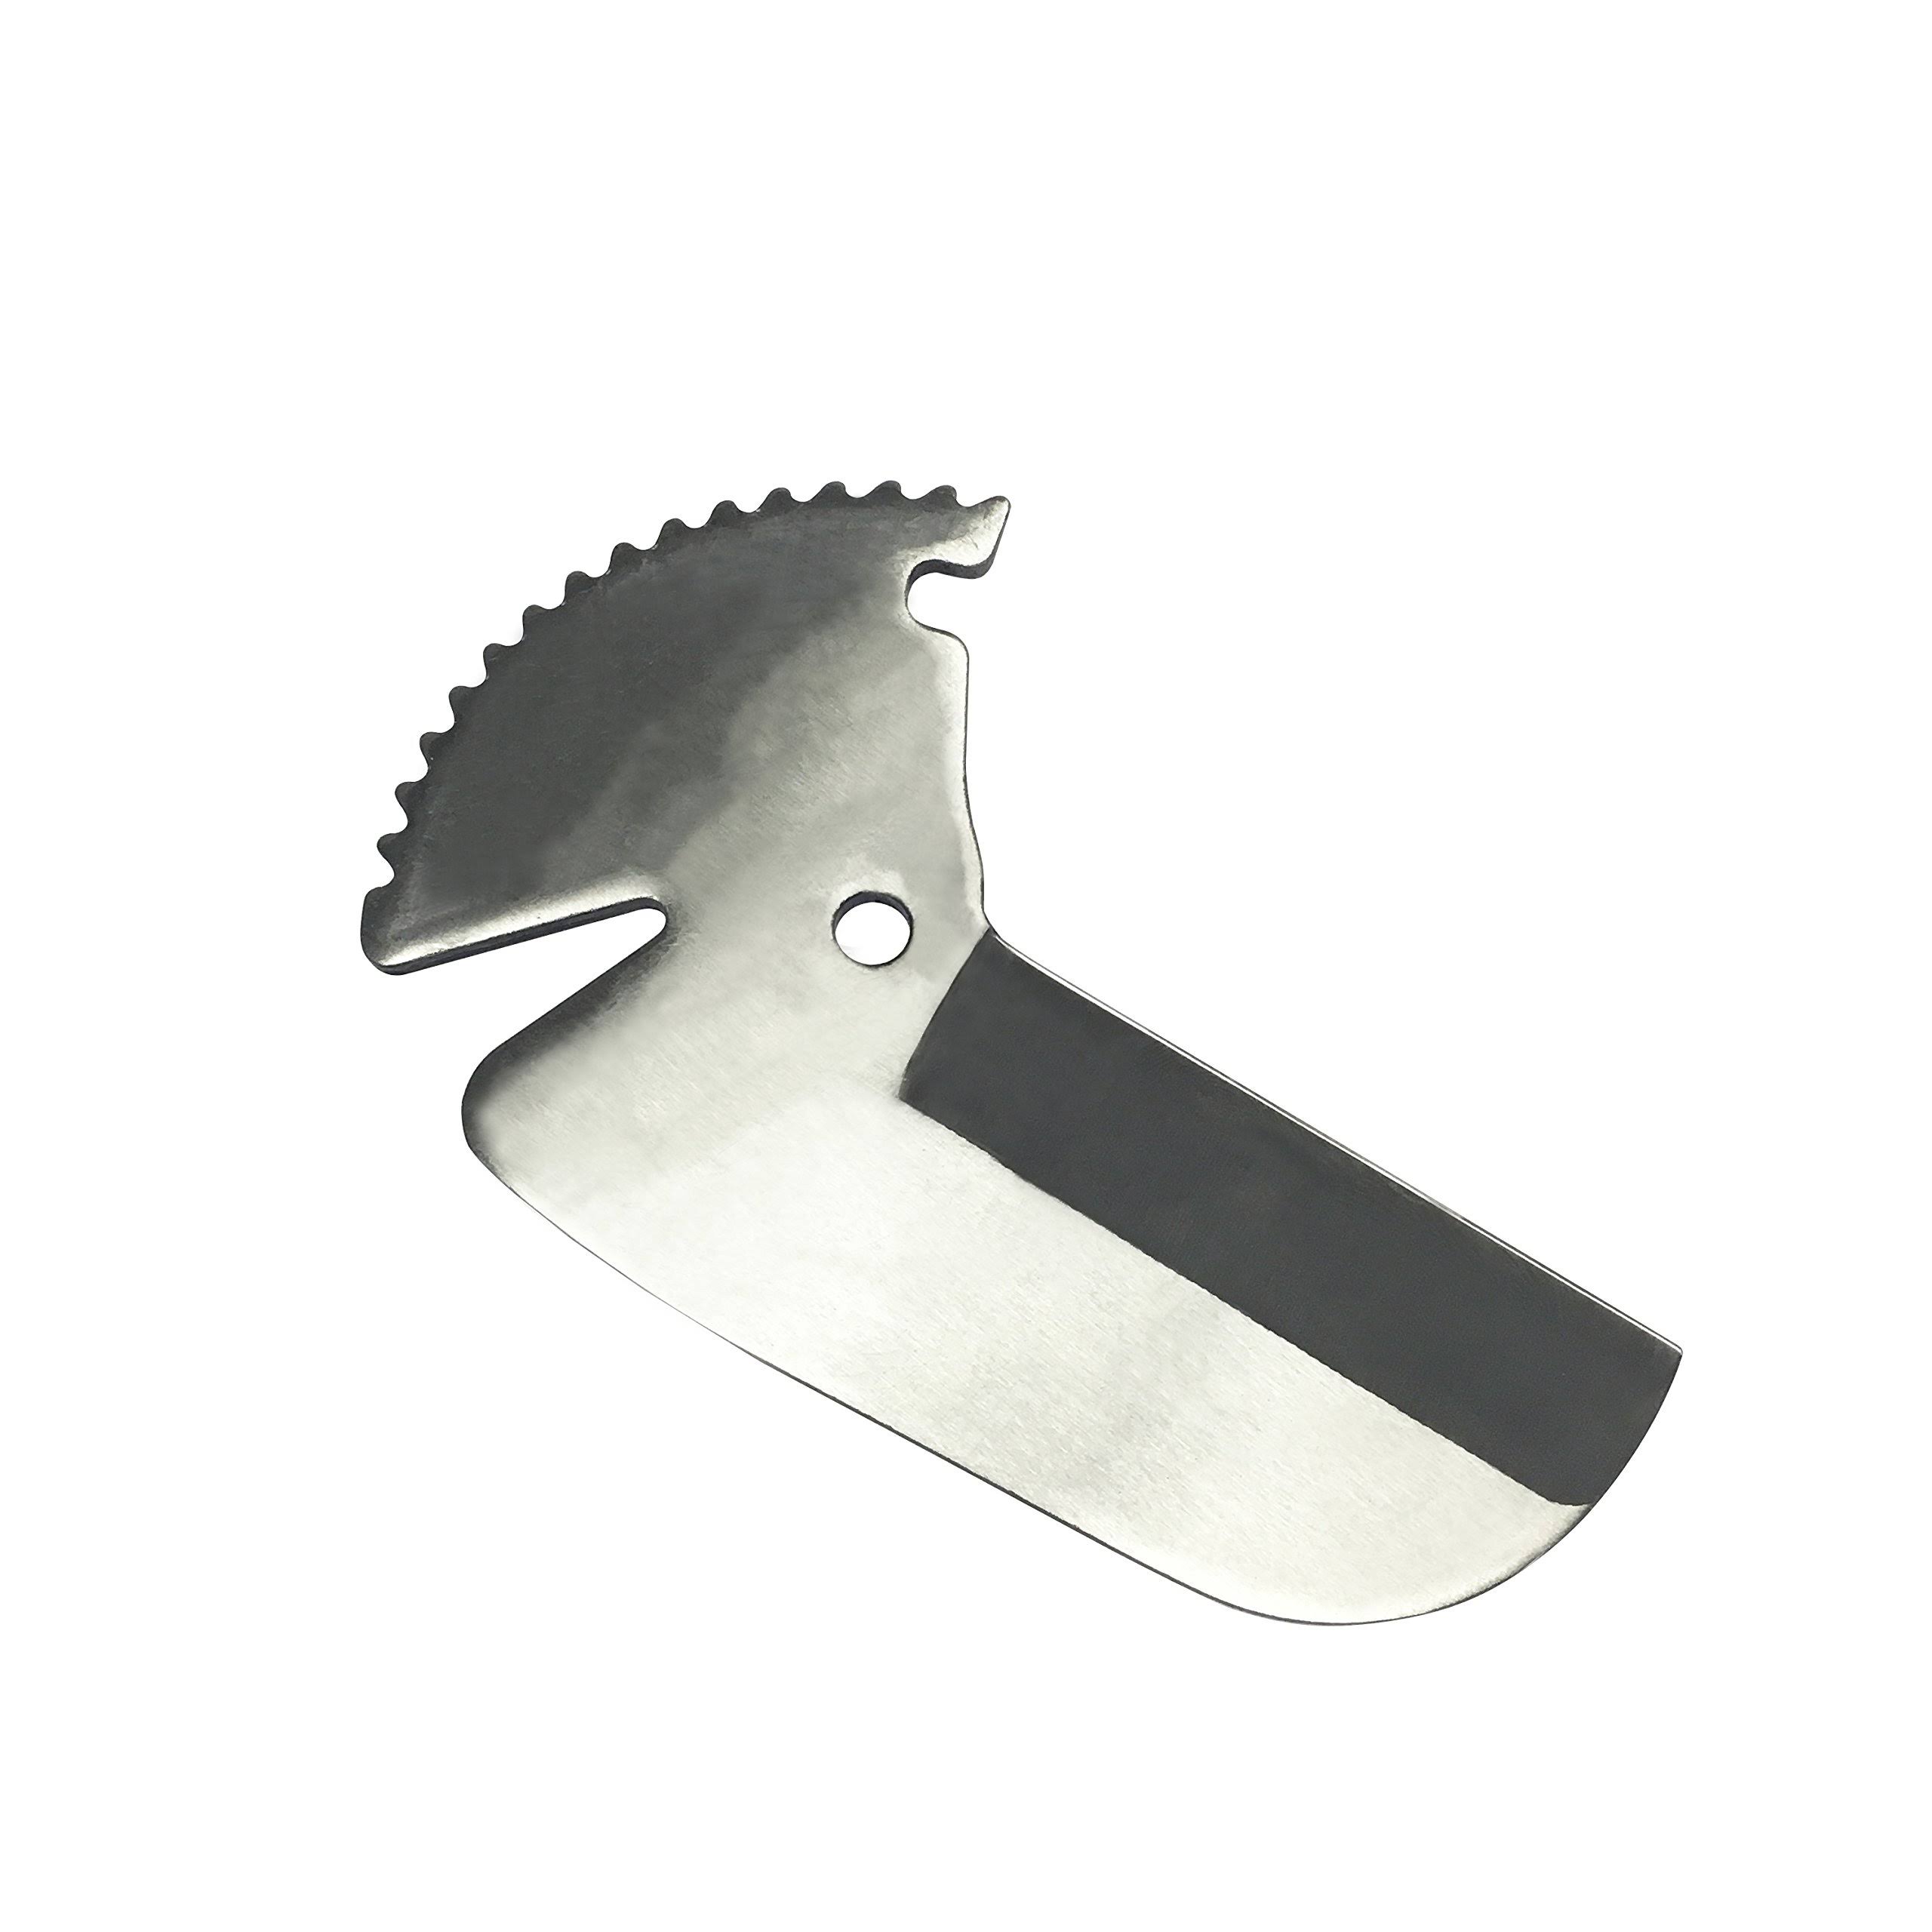 Keeney Pak Pipe Cutter Replacement Blade